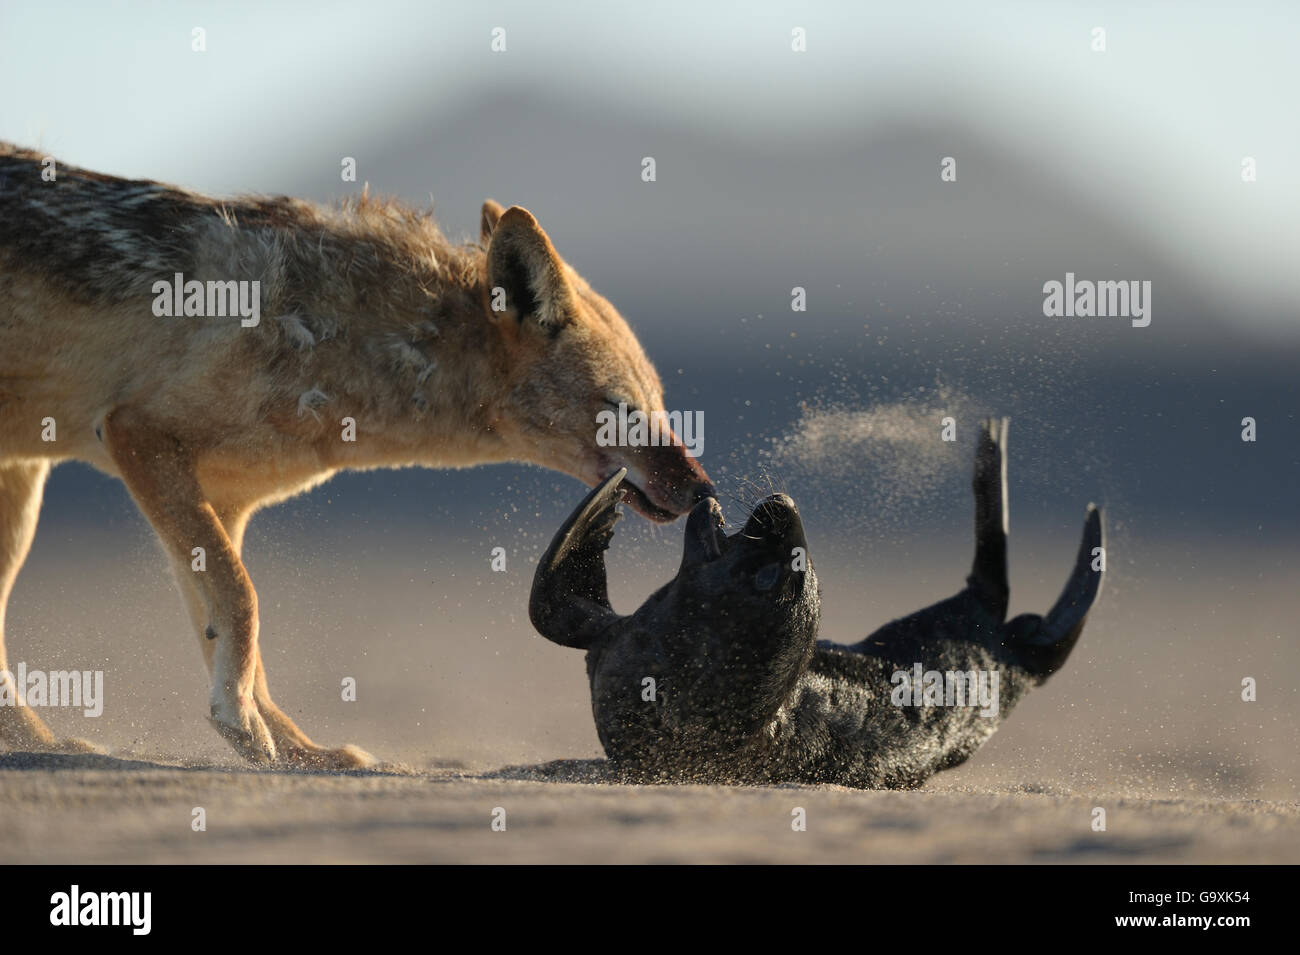 Black backed jackal (Canis mesomelas) attacking Cape fur seal (Arctocephalus pusillus) pup, Sperrgebiet National Park, Namibia, December. Sequence 3/6 Stock Photo